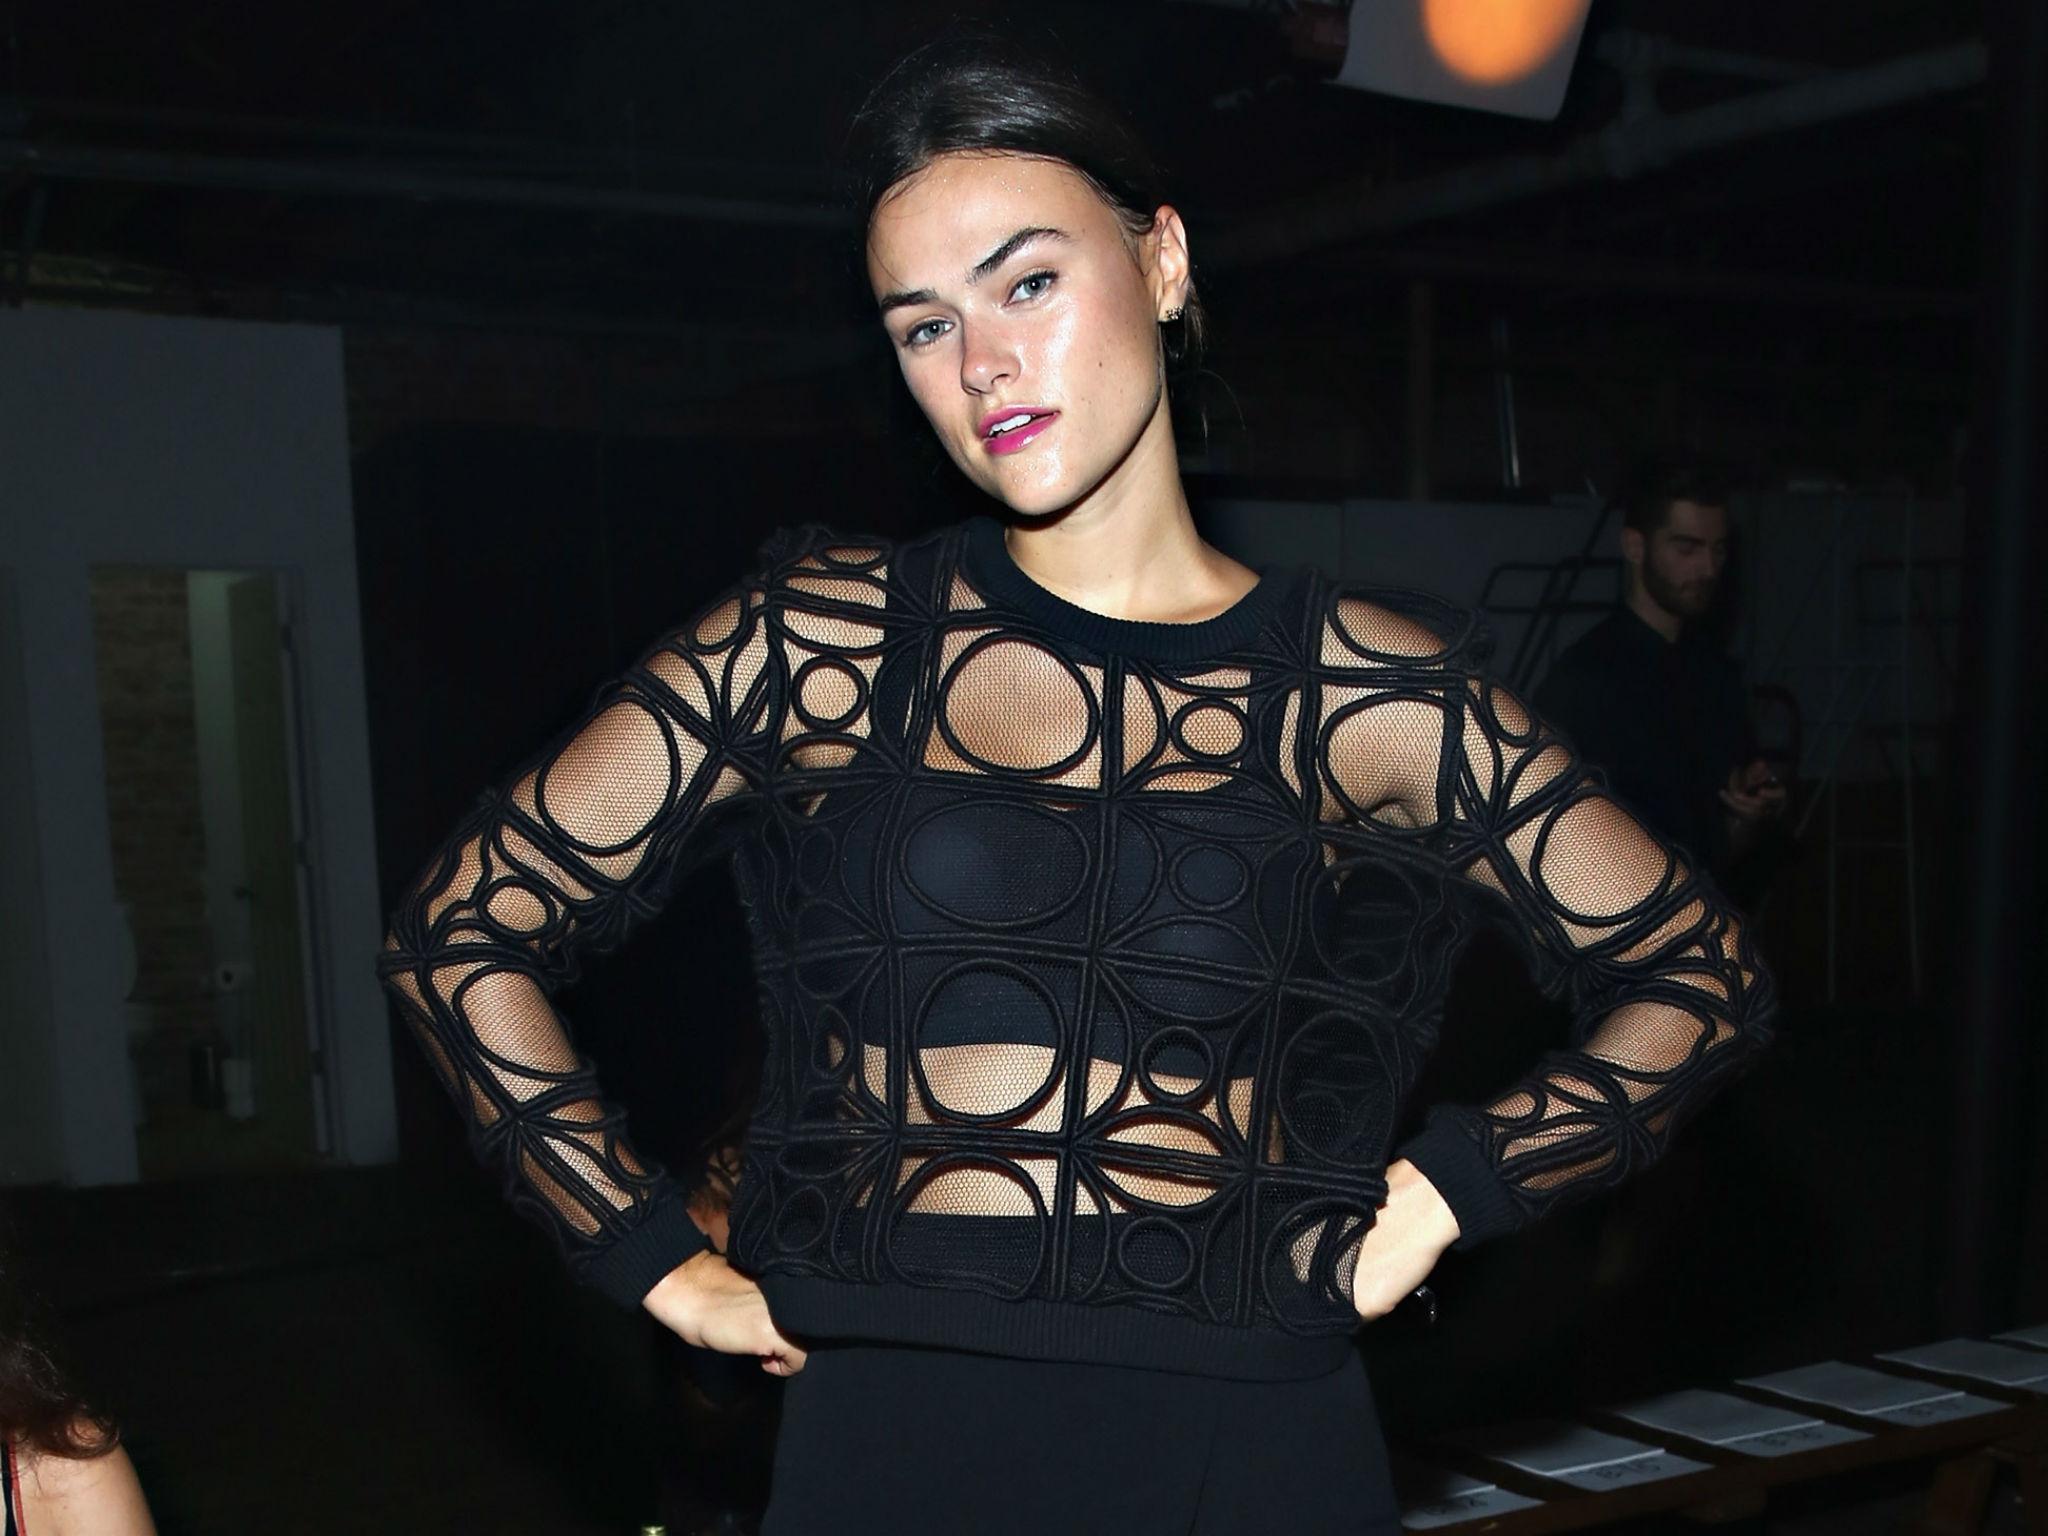 Calvin Klein Model Myla Dalbesio is Considered Plus-Size — And It's the  Most Ridiculous Thing We've Ever Heard - Life & Style